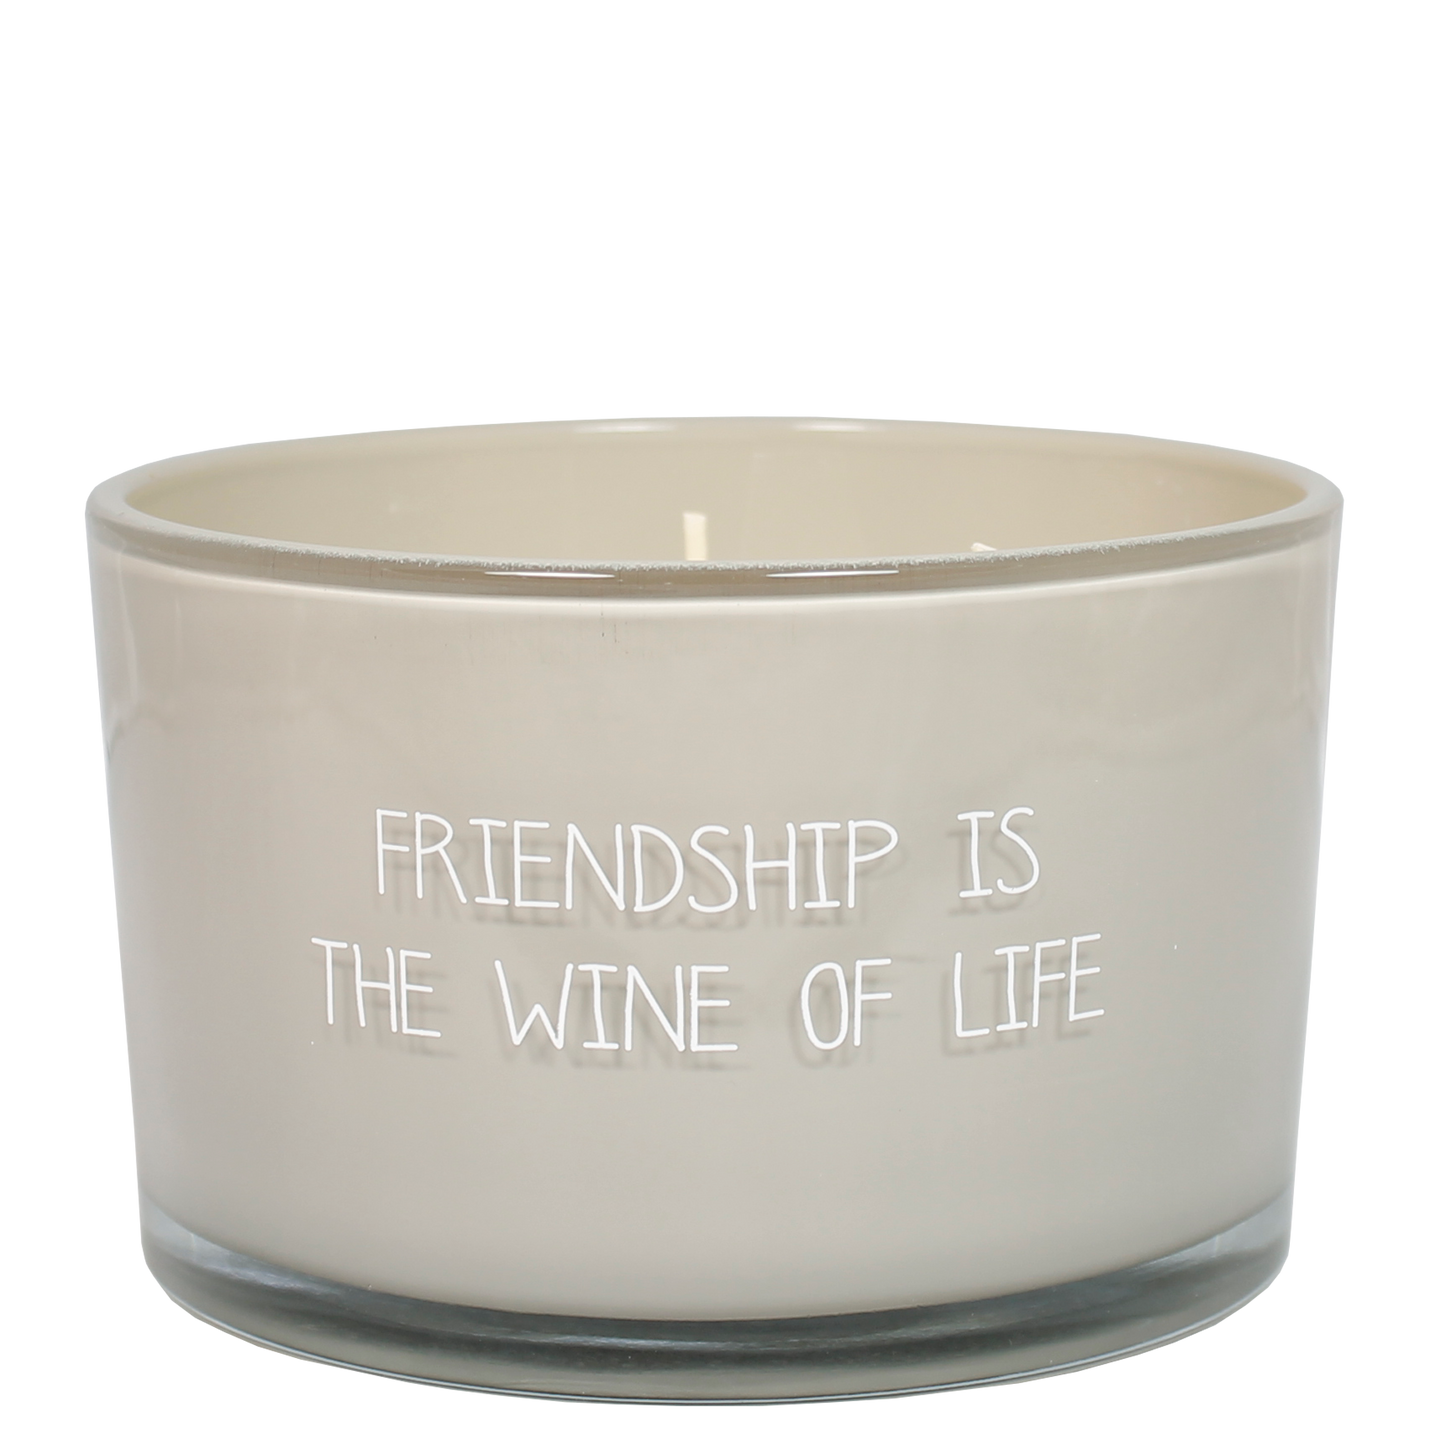 Duftkerze "FRIENDSHIP IS THE WINE OF LIFE" - My Flame